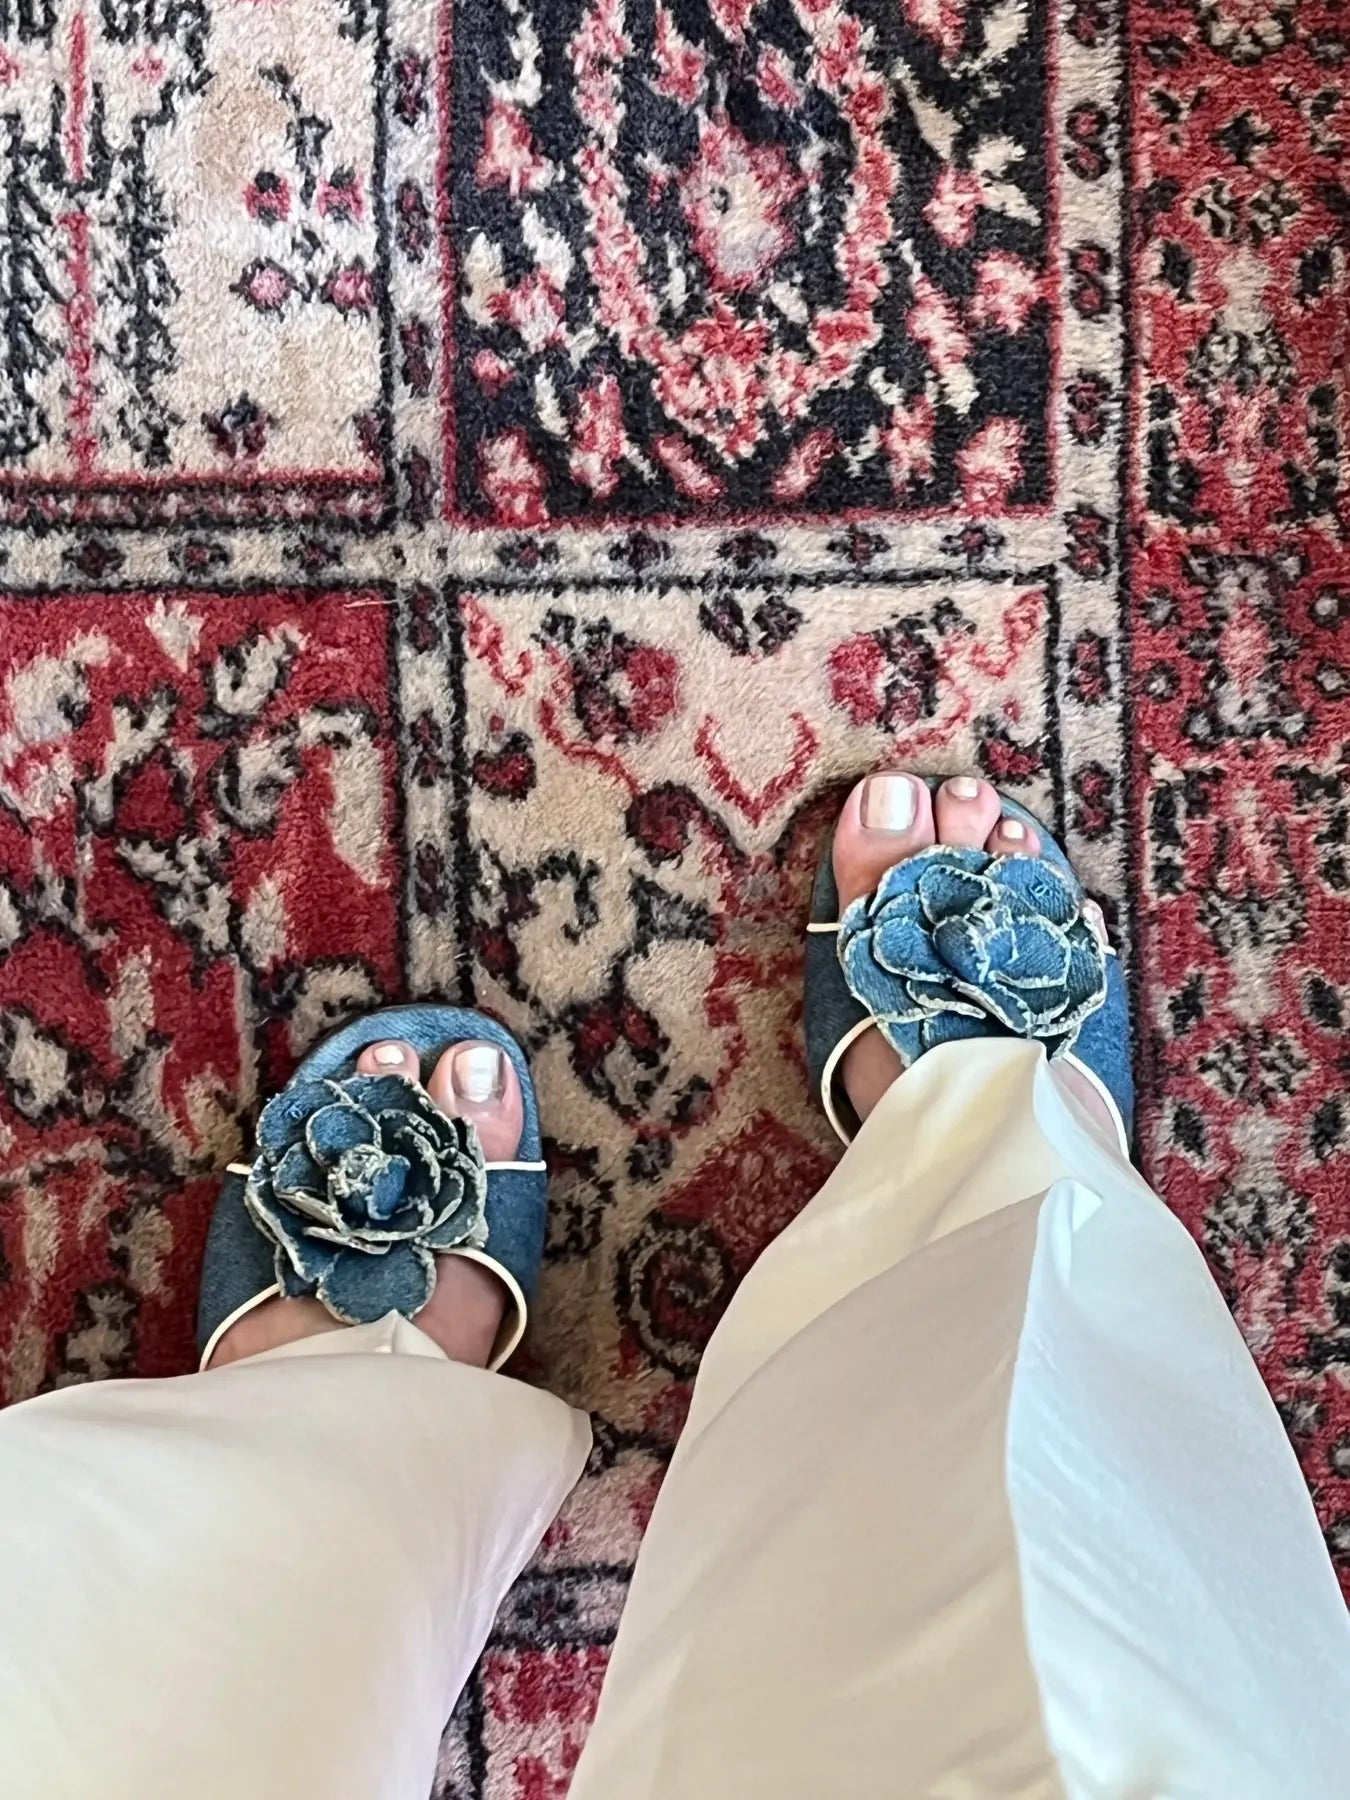 Chanel Denim Camellia Strap Sandals Heels, 37.5 | Archive Square The millennial decorator vintage mules Chanel mules Bow Mules Matilda Djerf